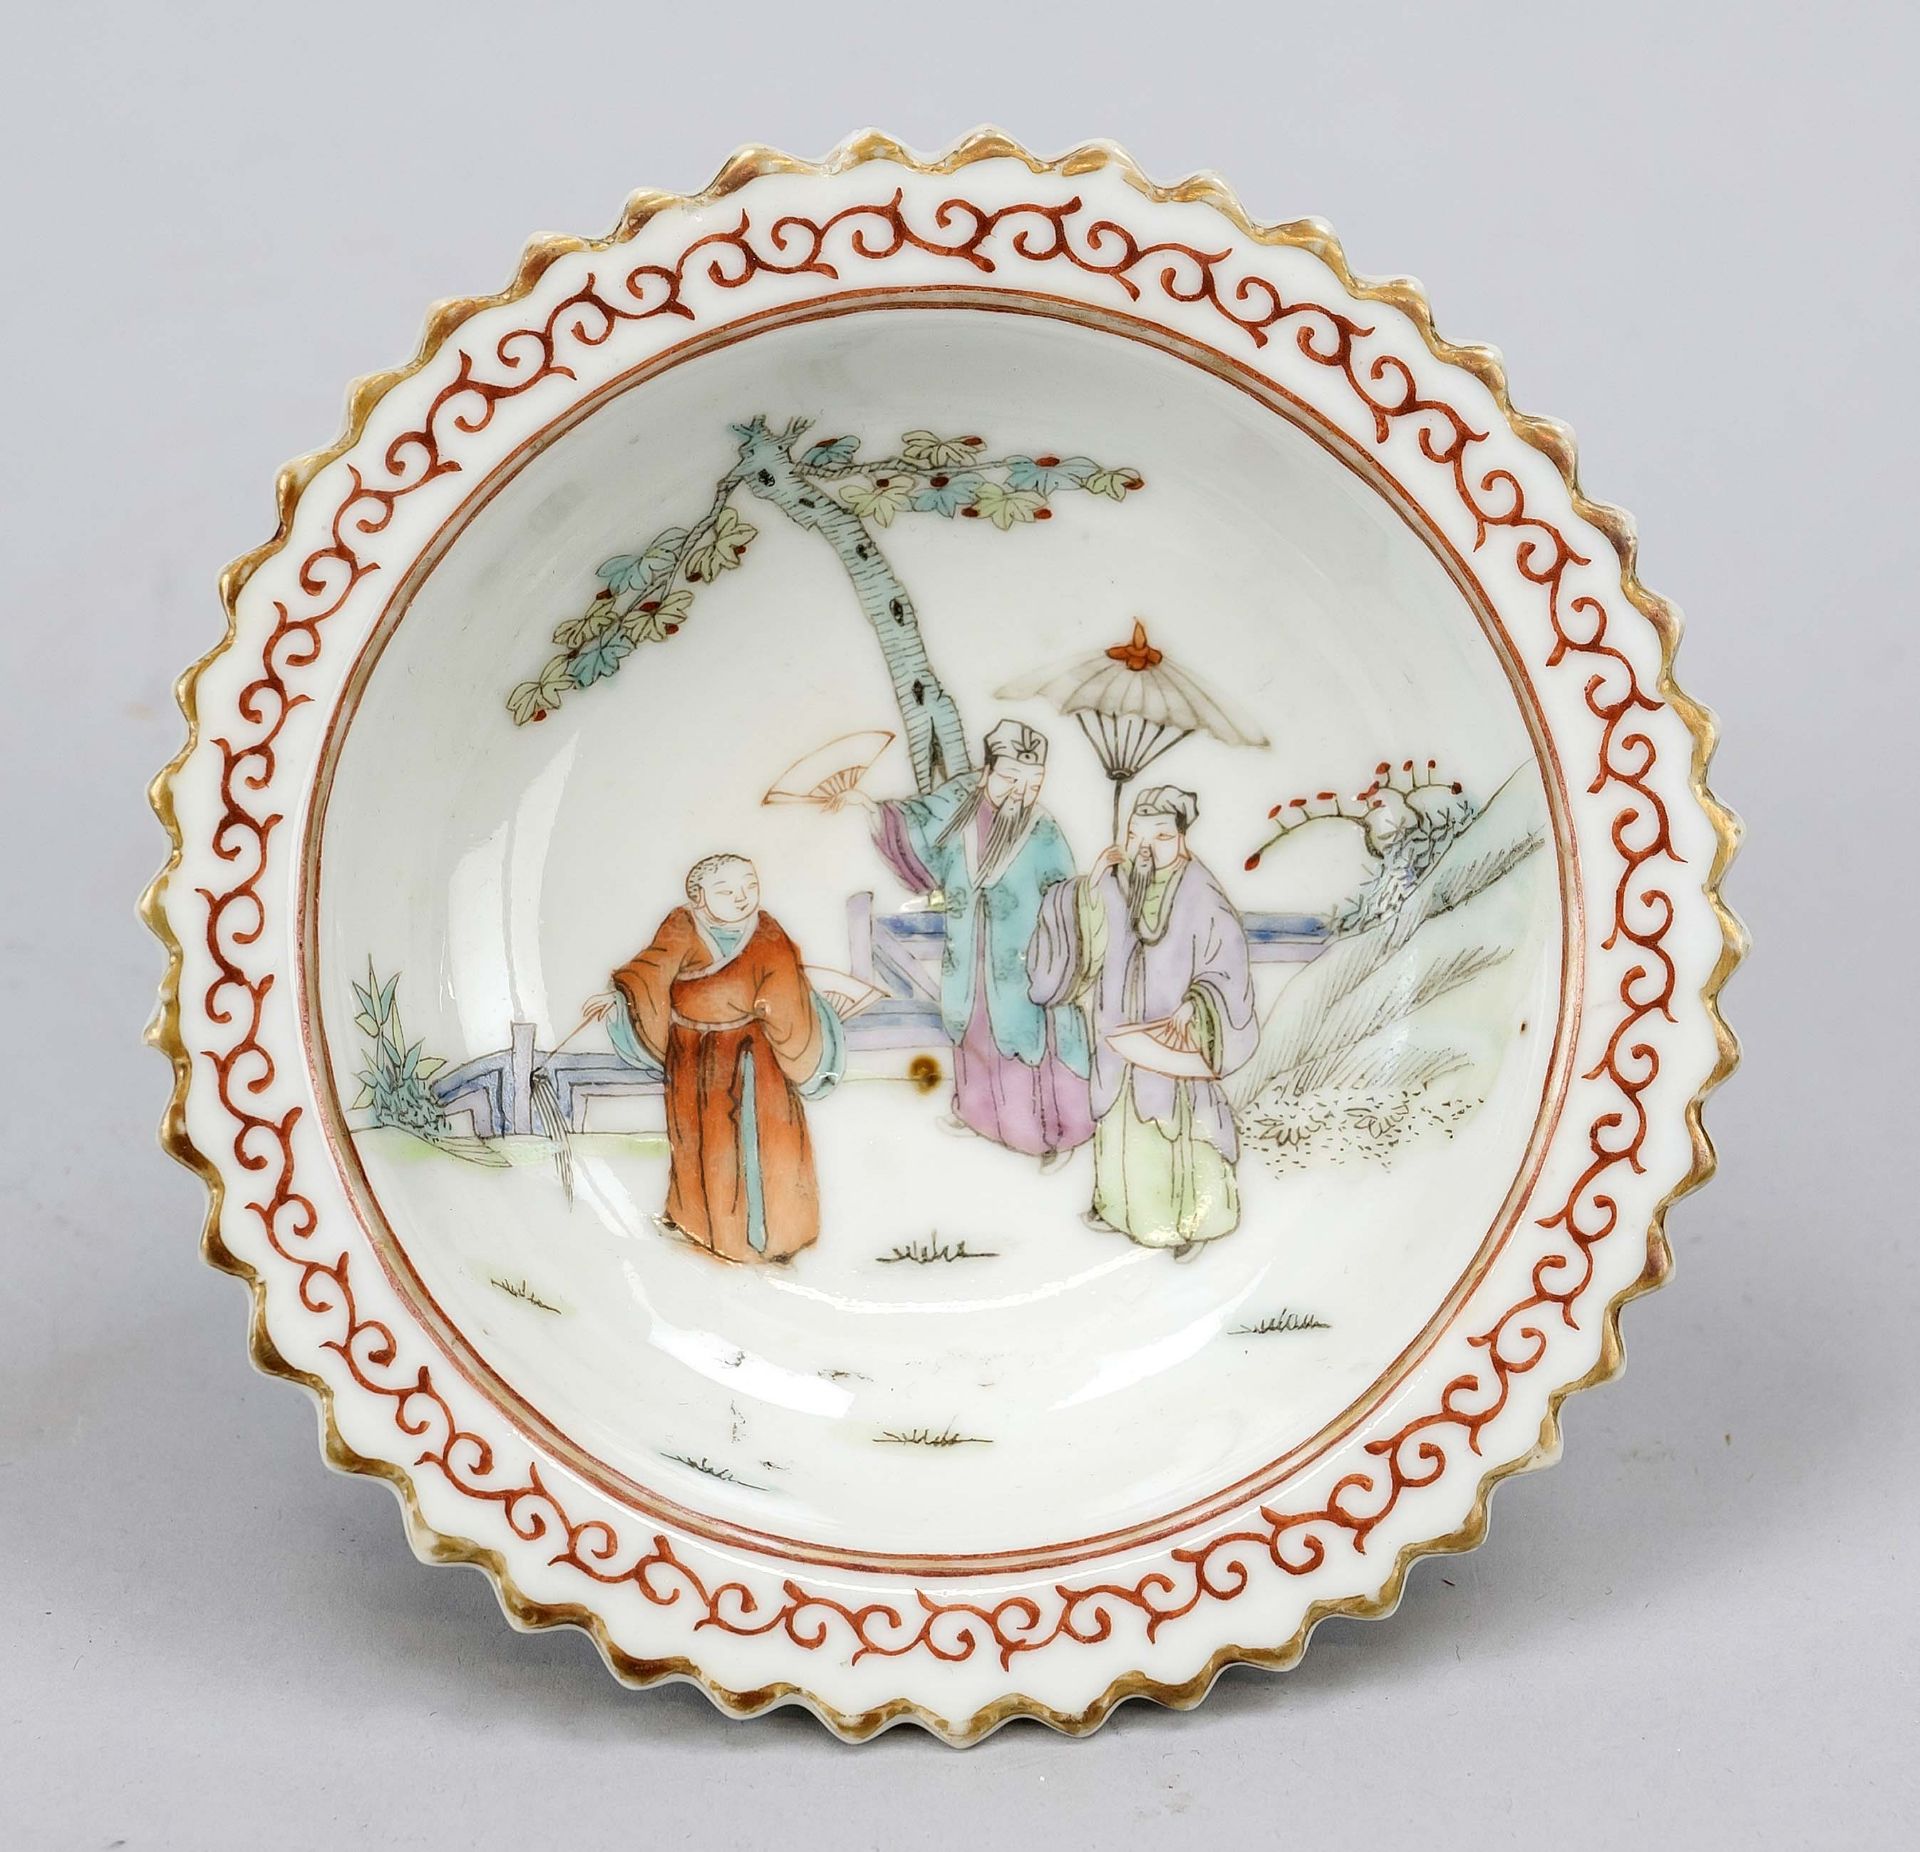 Small Famille Rose footed bowl, China 19th/20th century A multi-figure scene in the center, the - Image 2 of 2